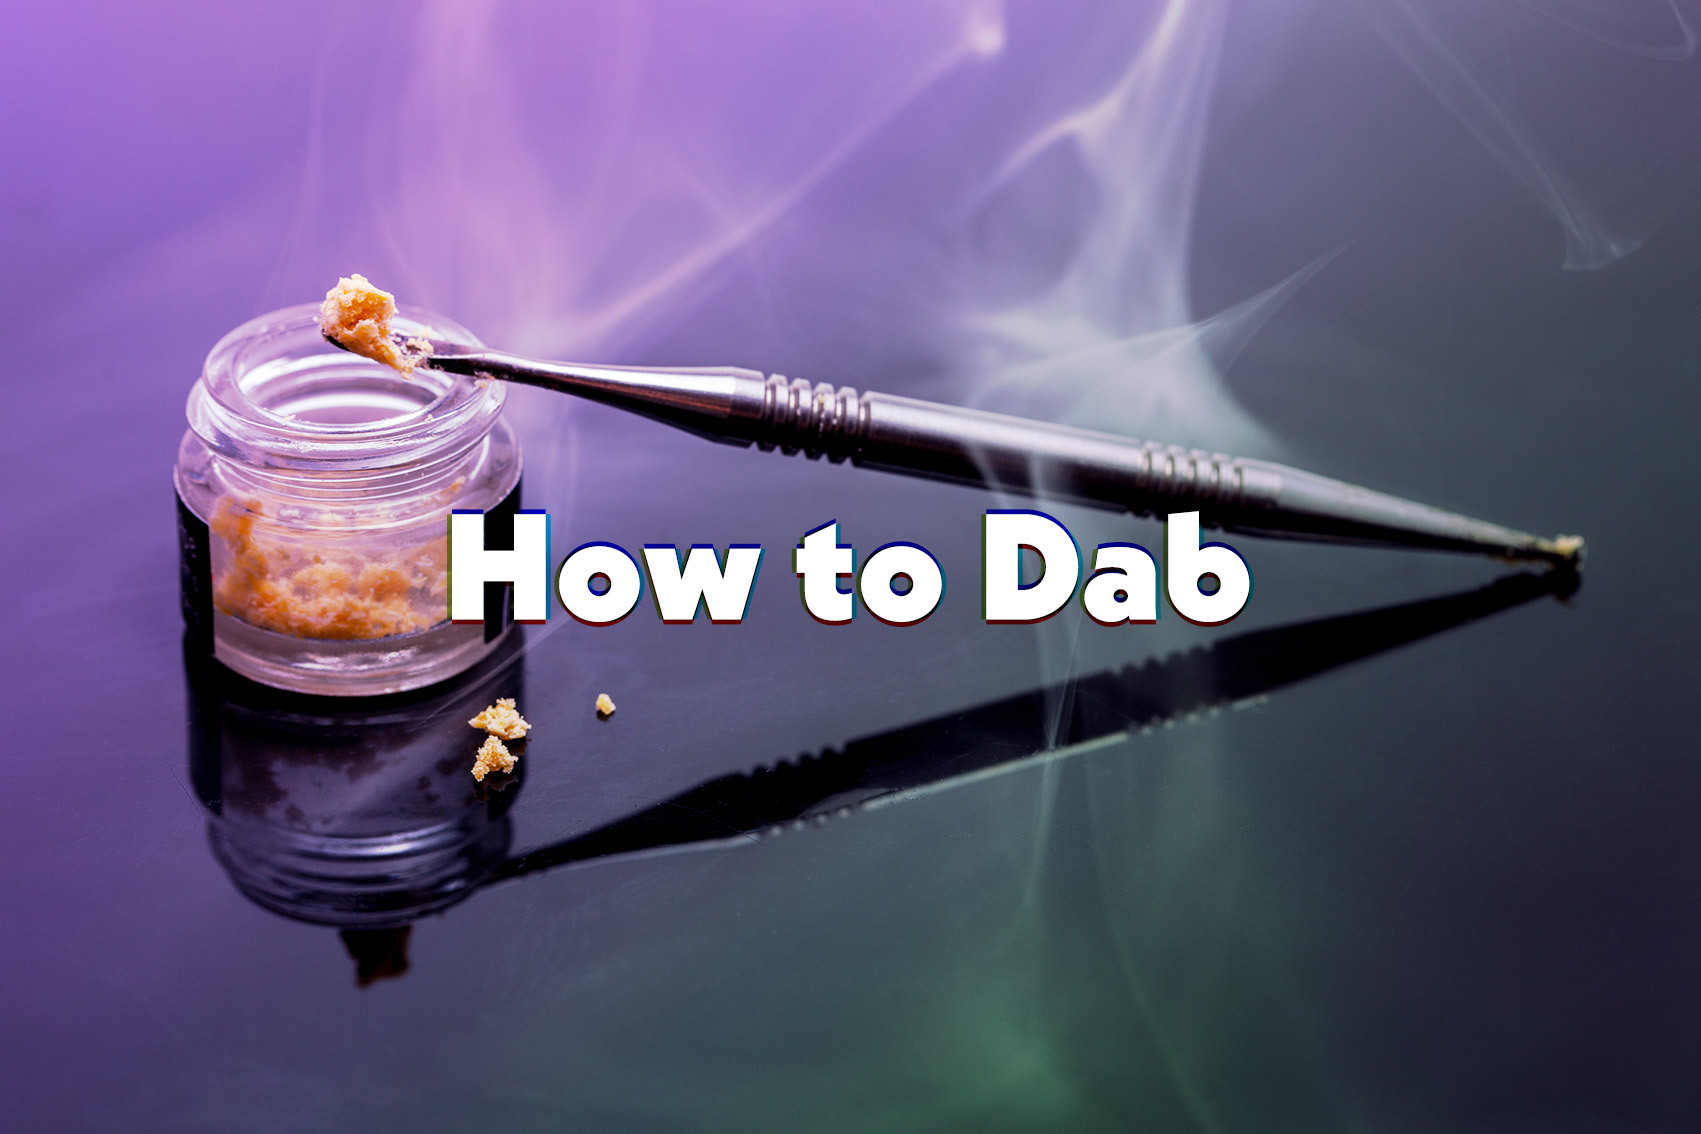 How to Dab